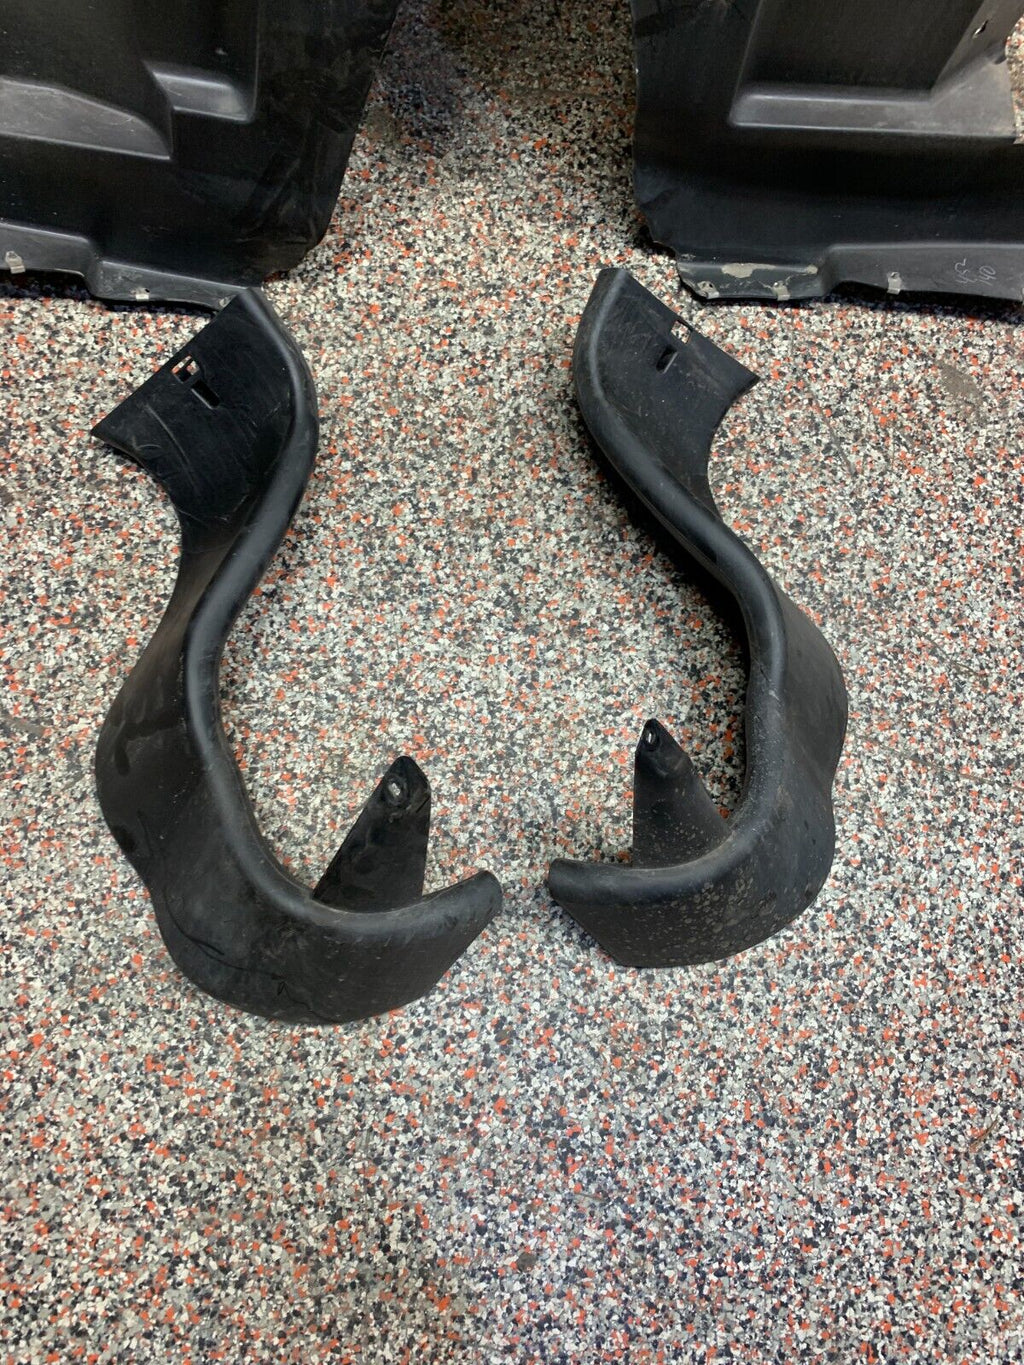 2012 CORVETTE C6 GRANDSPORT OEM REAR WIDEBODY FENDER LINERS WITH DUCTS USED